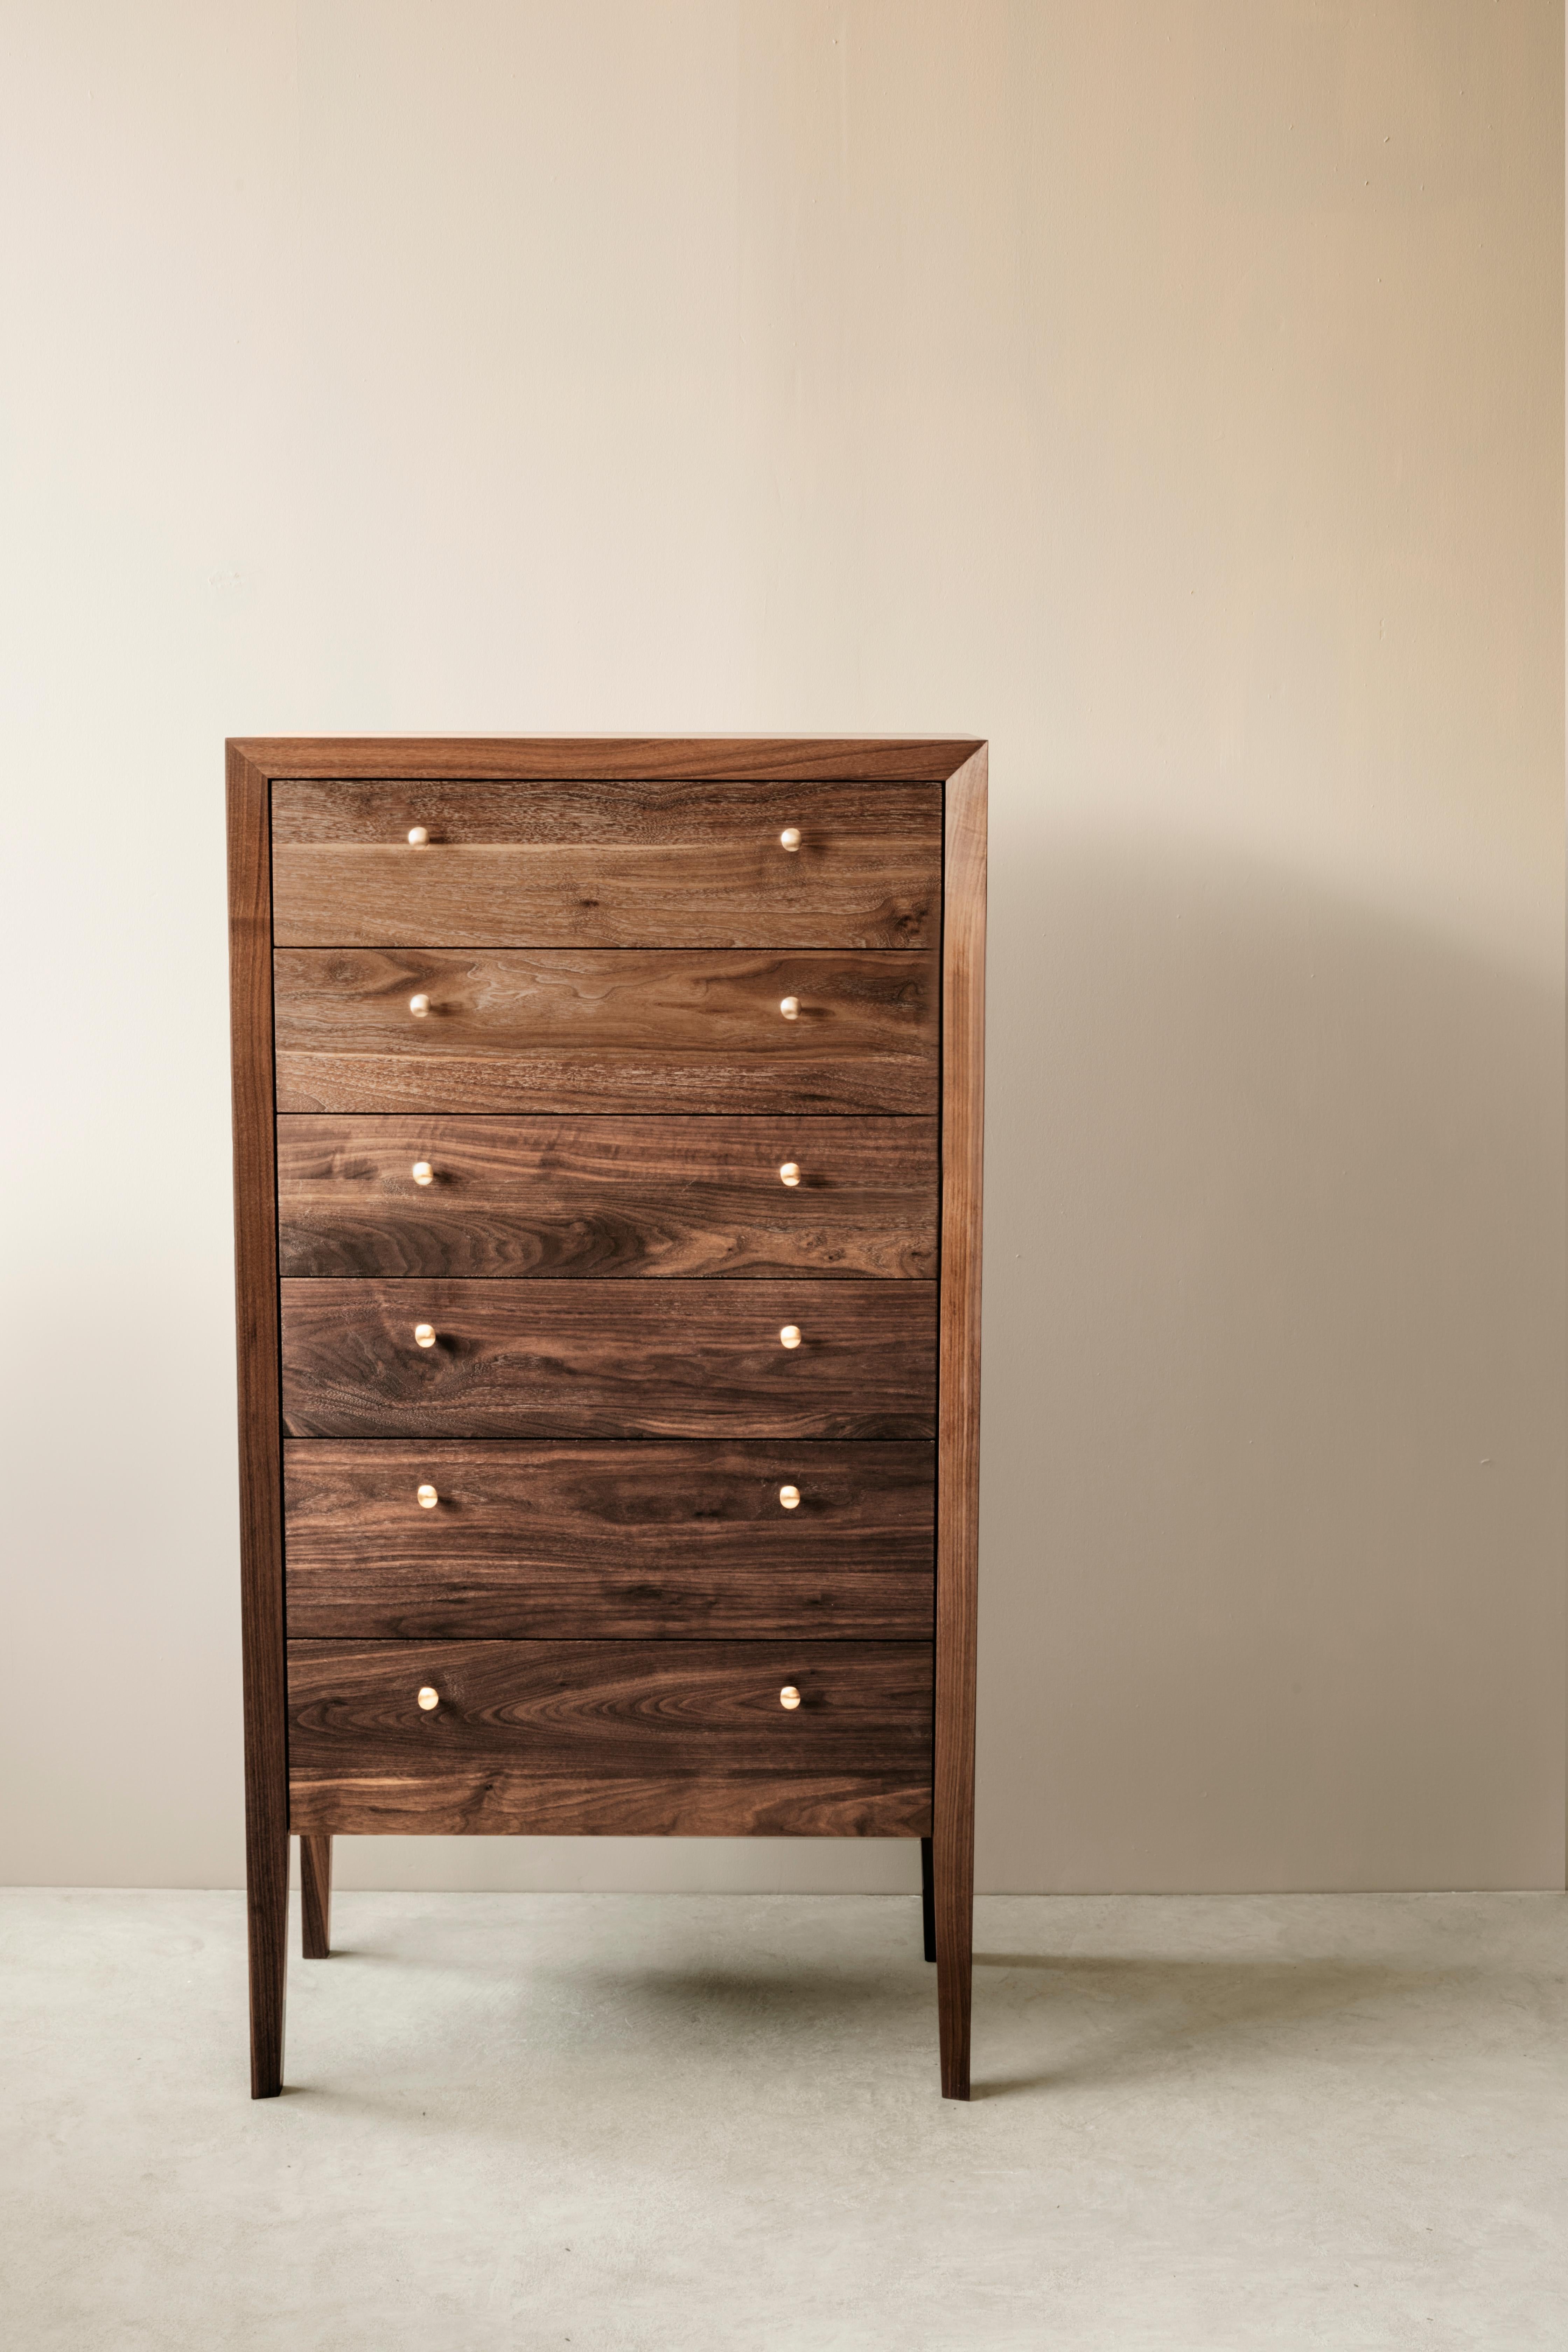 The chest of drawers was designed with meticulous attention to detail - carefully studied proportions, hand selected boards that highlight the beautiful movement and grain patterns in their hardwoods, dovetail joinery and slides. The Richard Watson